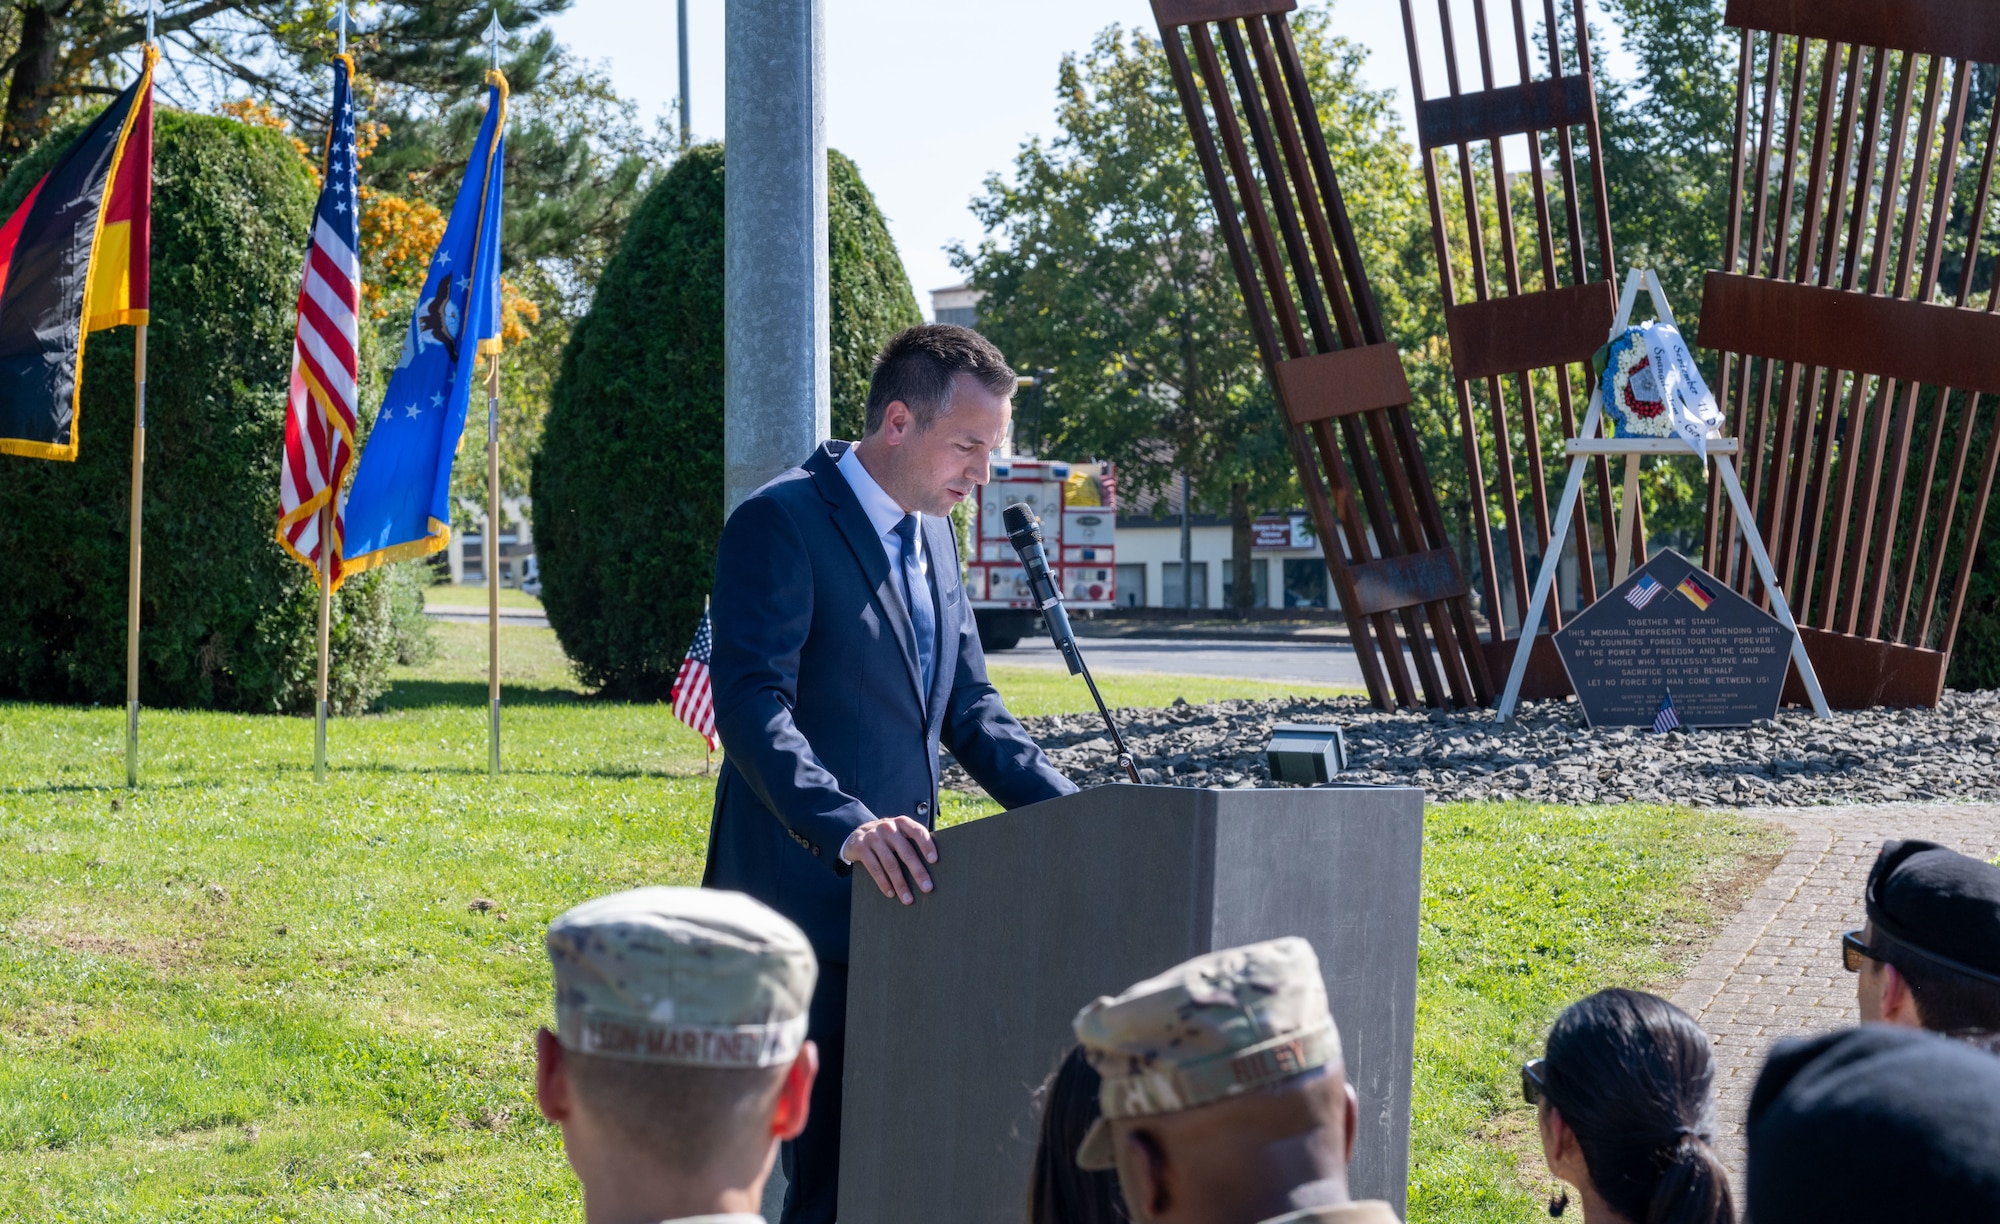 Herr Manuel Follmann, area mayor of Wittlich-Land, Germany, gives remarks during a 9/11 Remembrance ceremony,